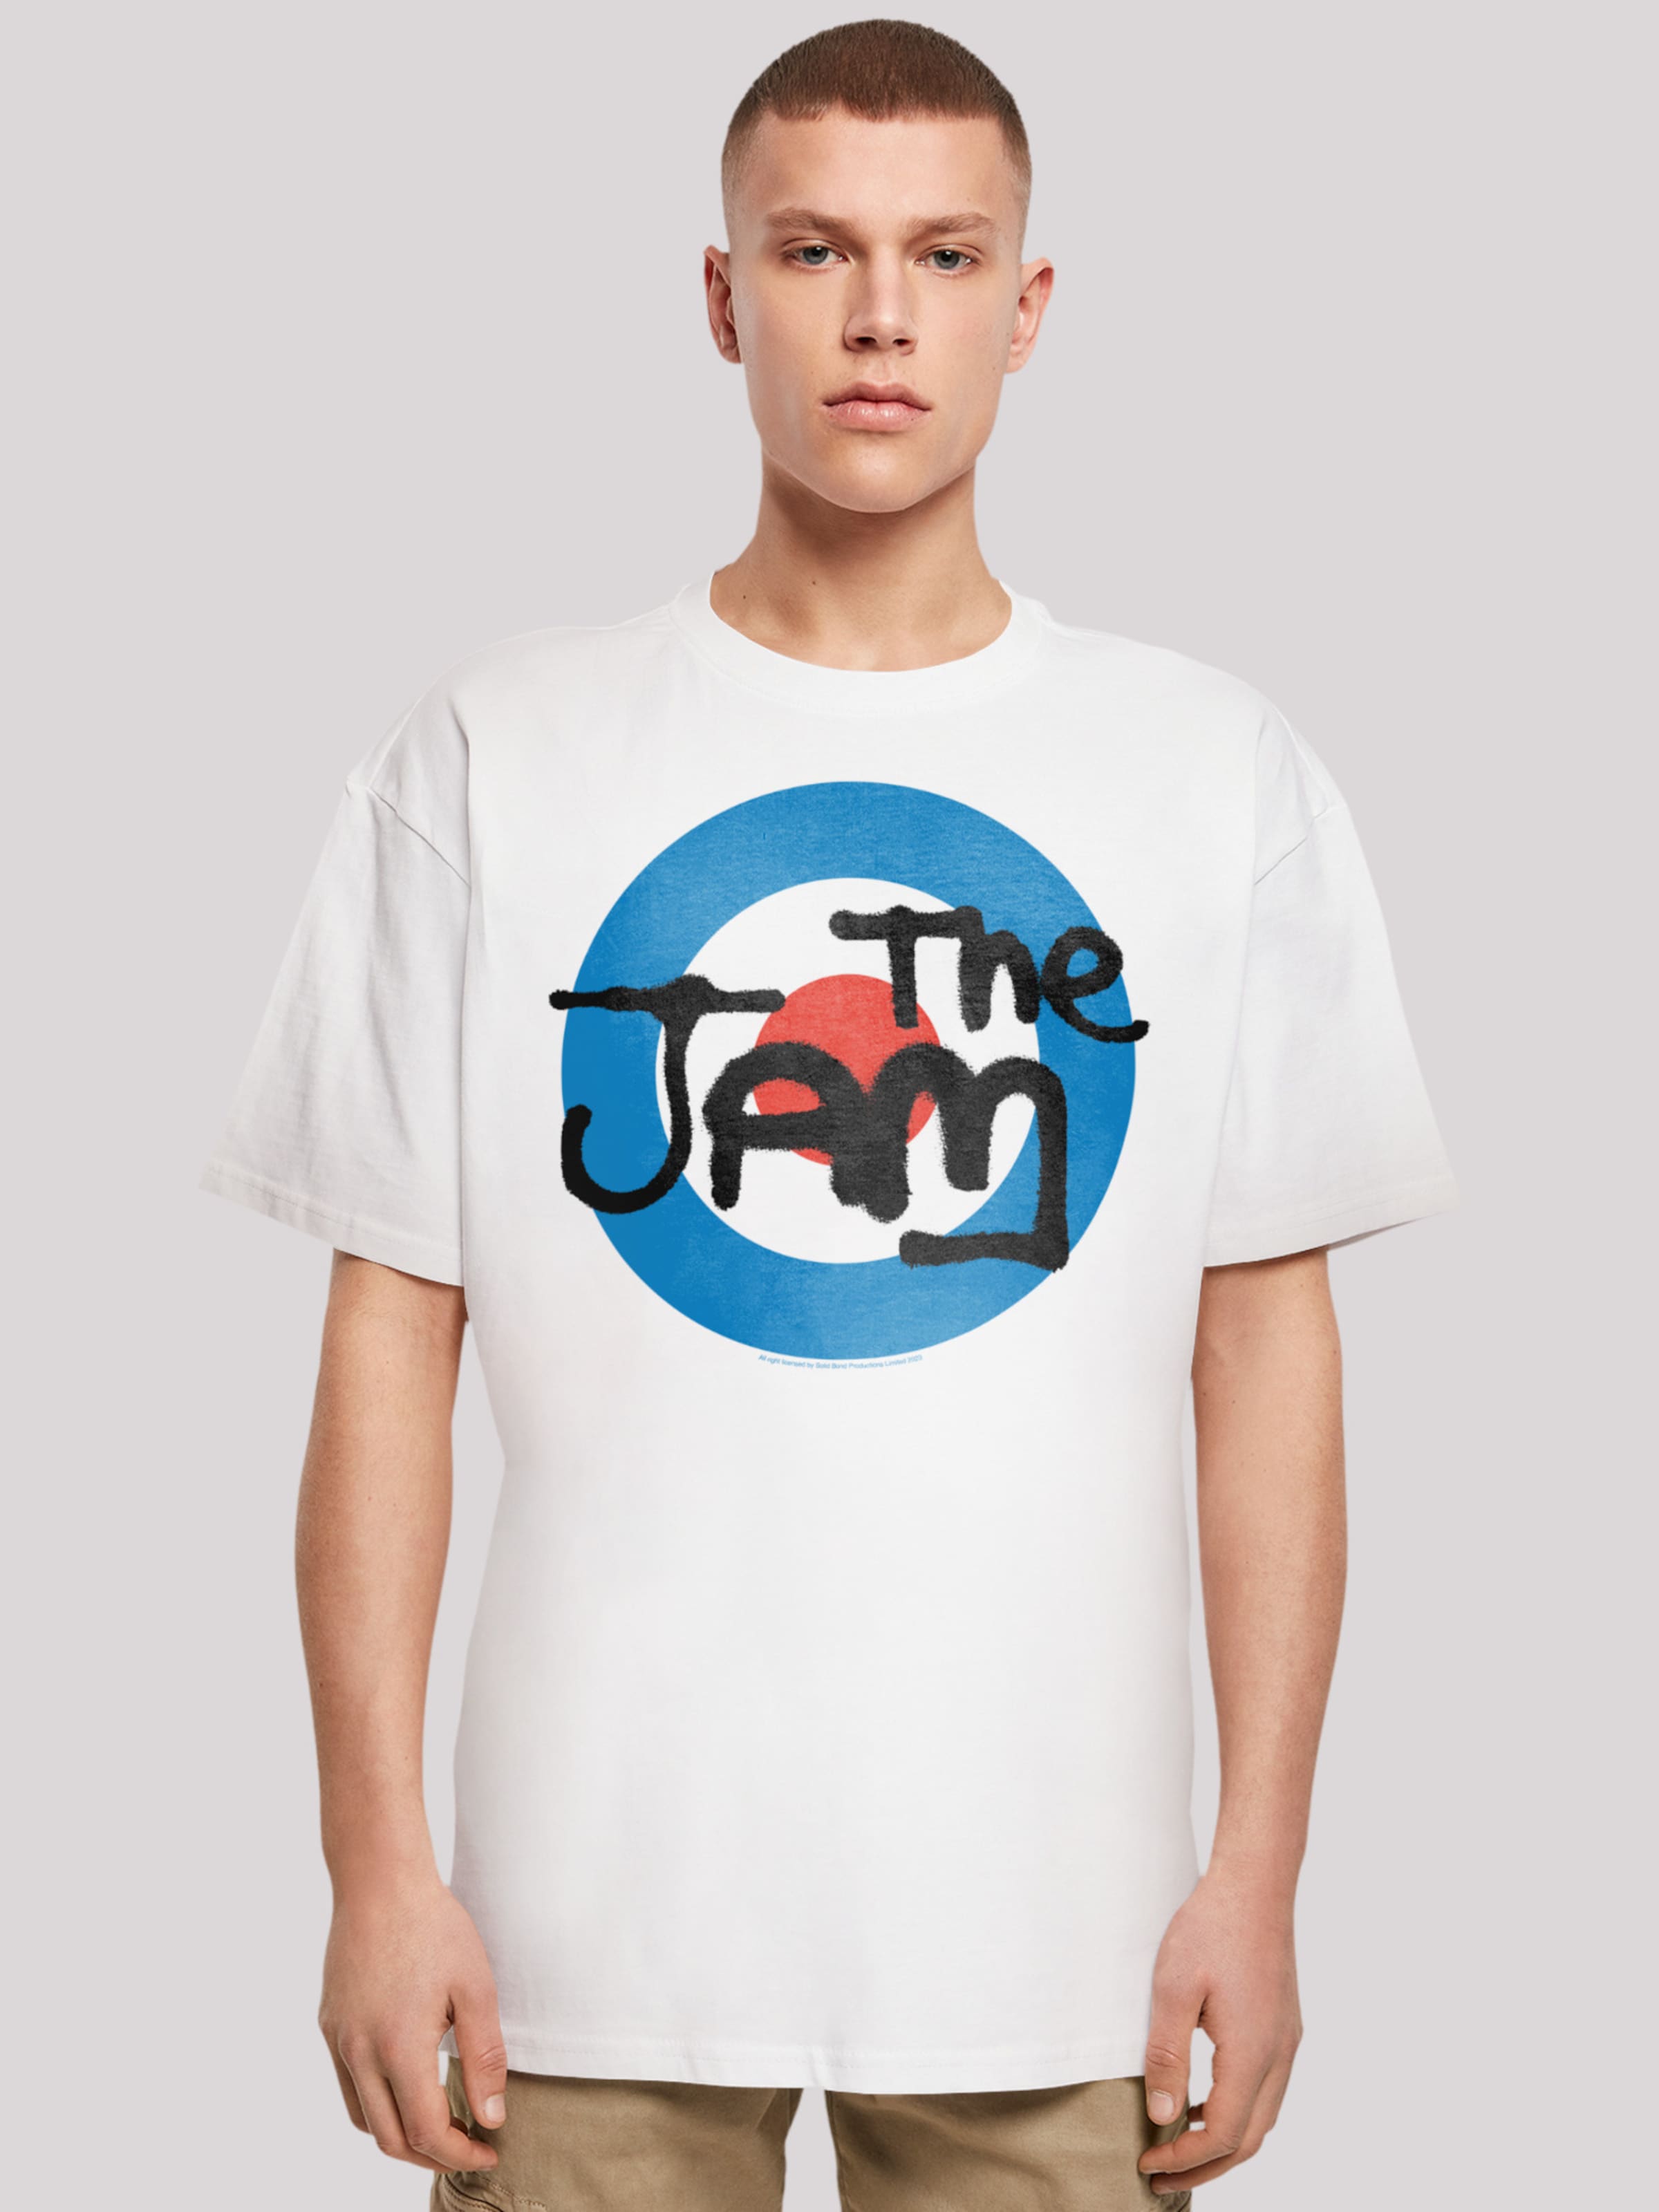 Classic ABOUT \'The in Logo\' F4NT4STIC YOU Band Jam | White Shirt